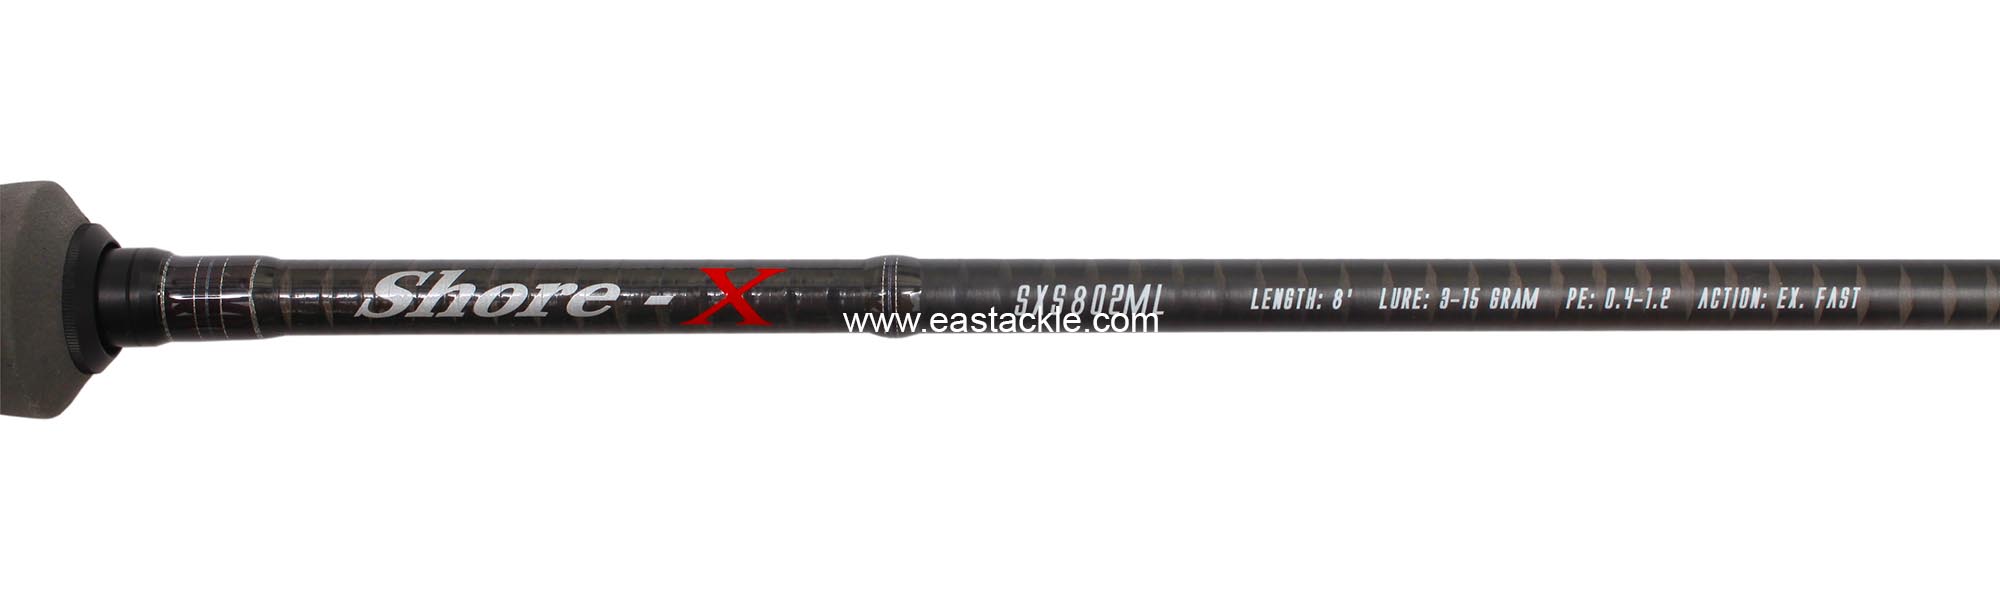 Storm - Shore-X - SXS802ML - Spinning Rod - Blank Specifications | Eastackle